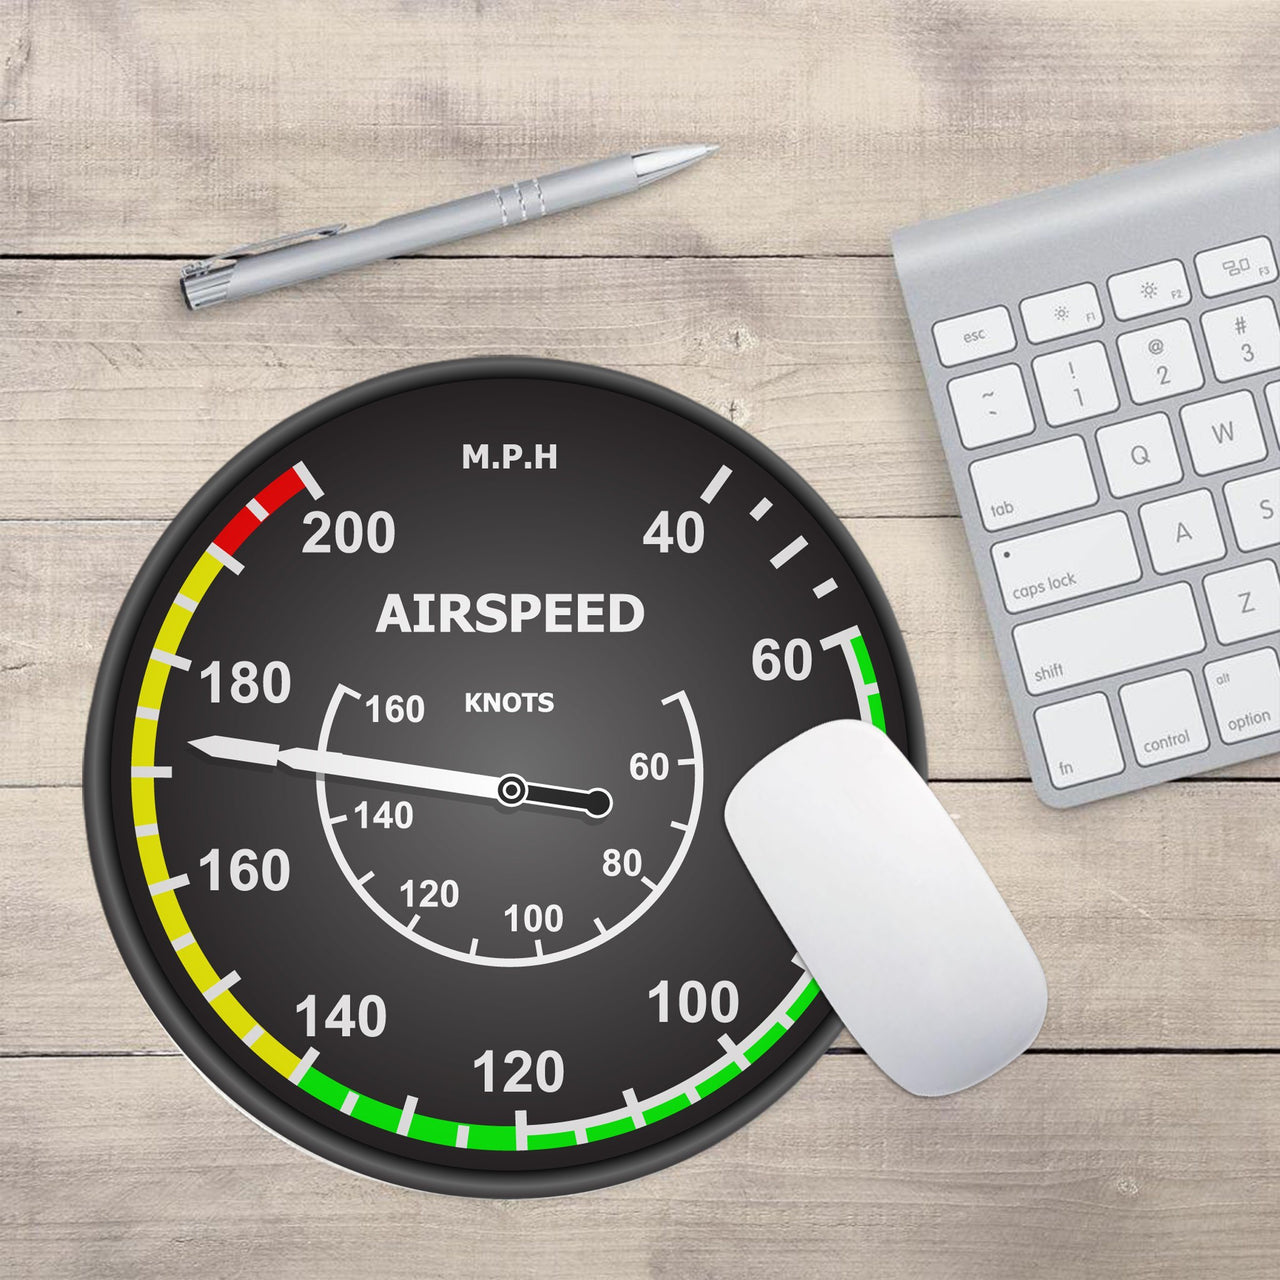 Airplane Instrument Series "Airspeed 2" Designed Mouse Pads Pilot Eyes Store 